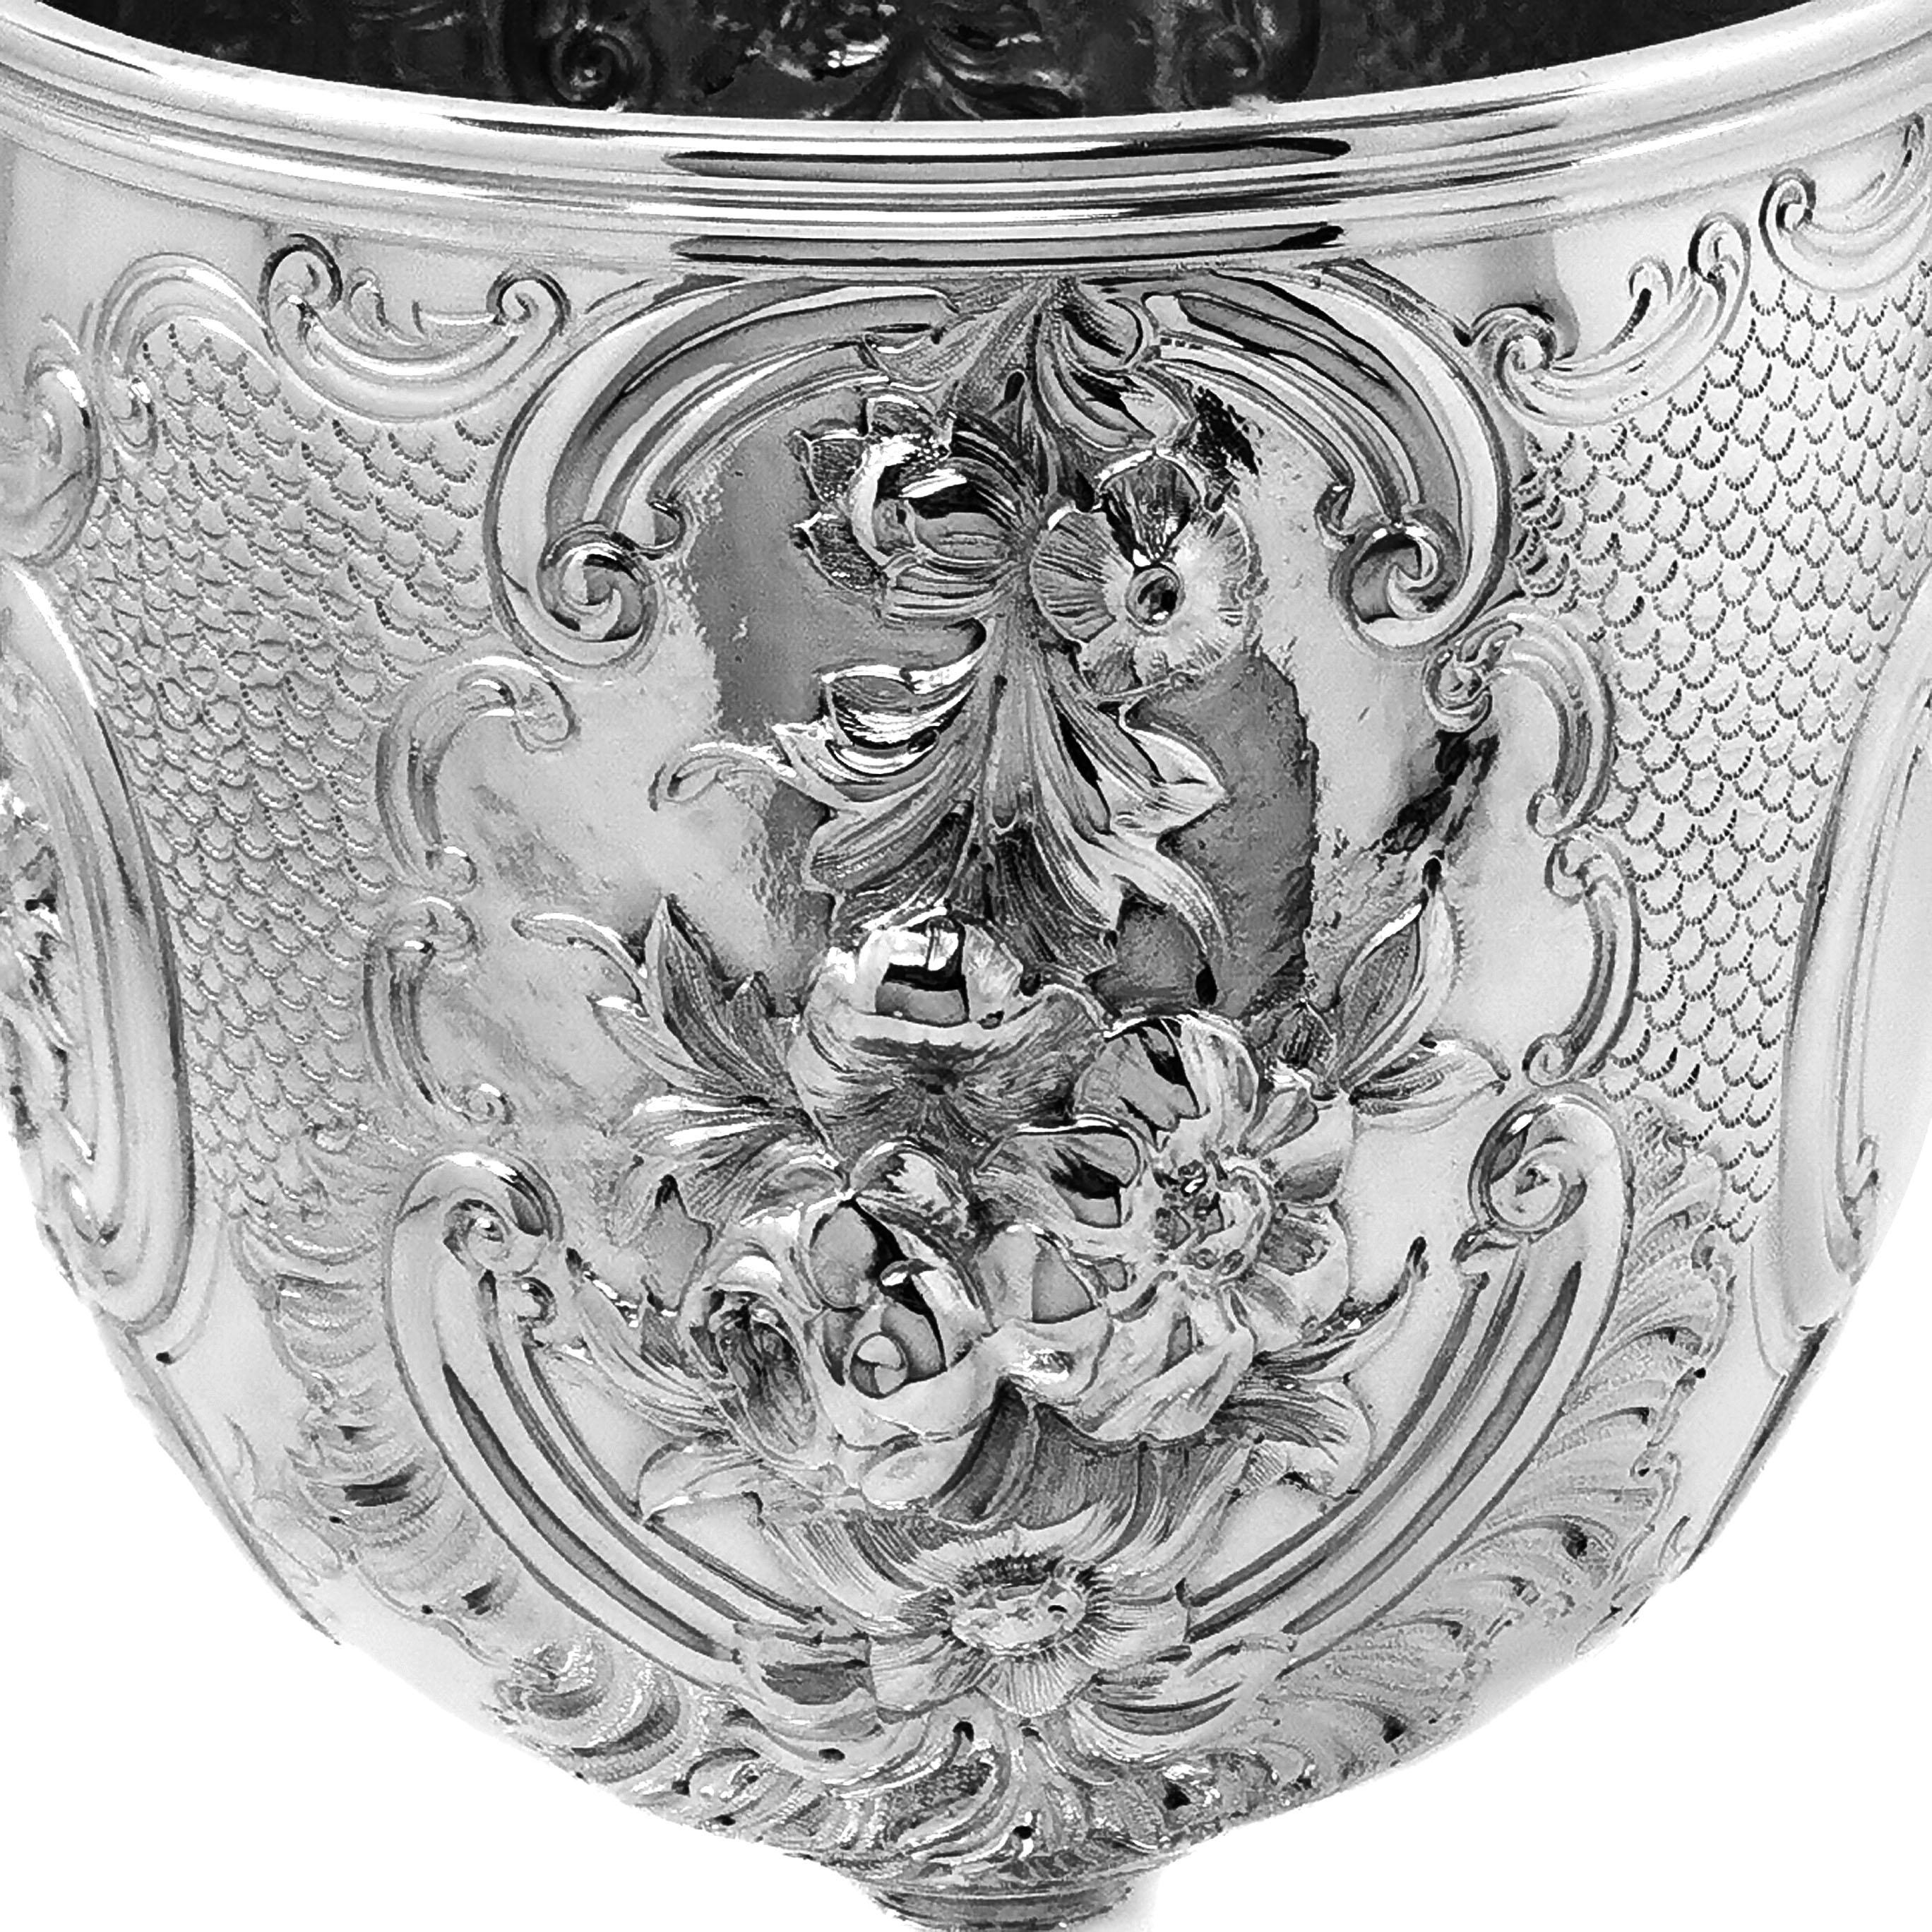 19th Century Large Antique Victorian Sterling Silver Cup / Goblet, 1863